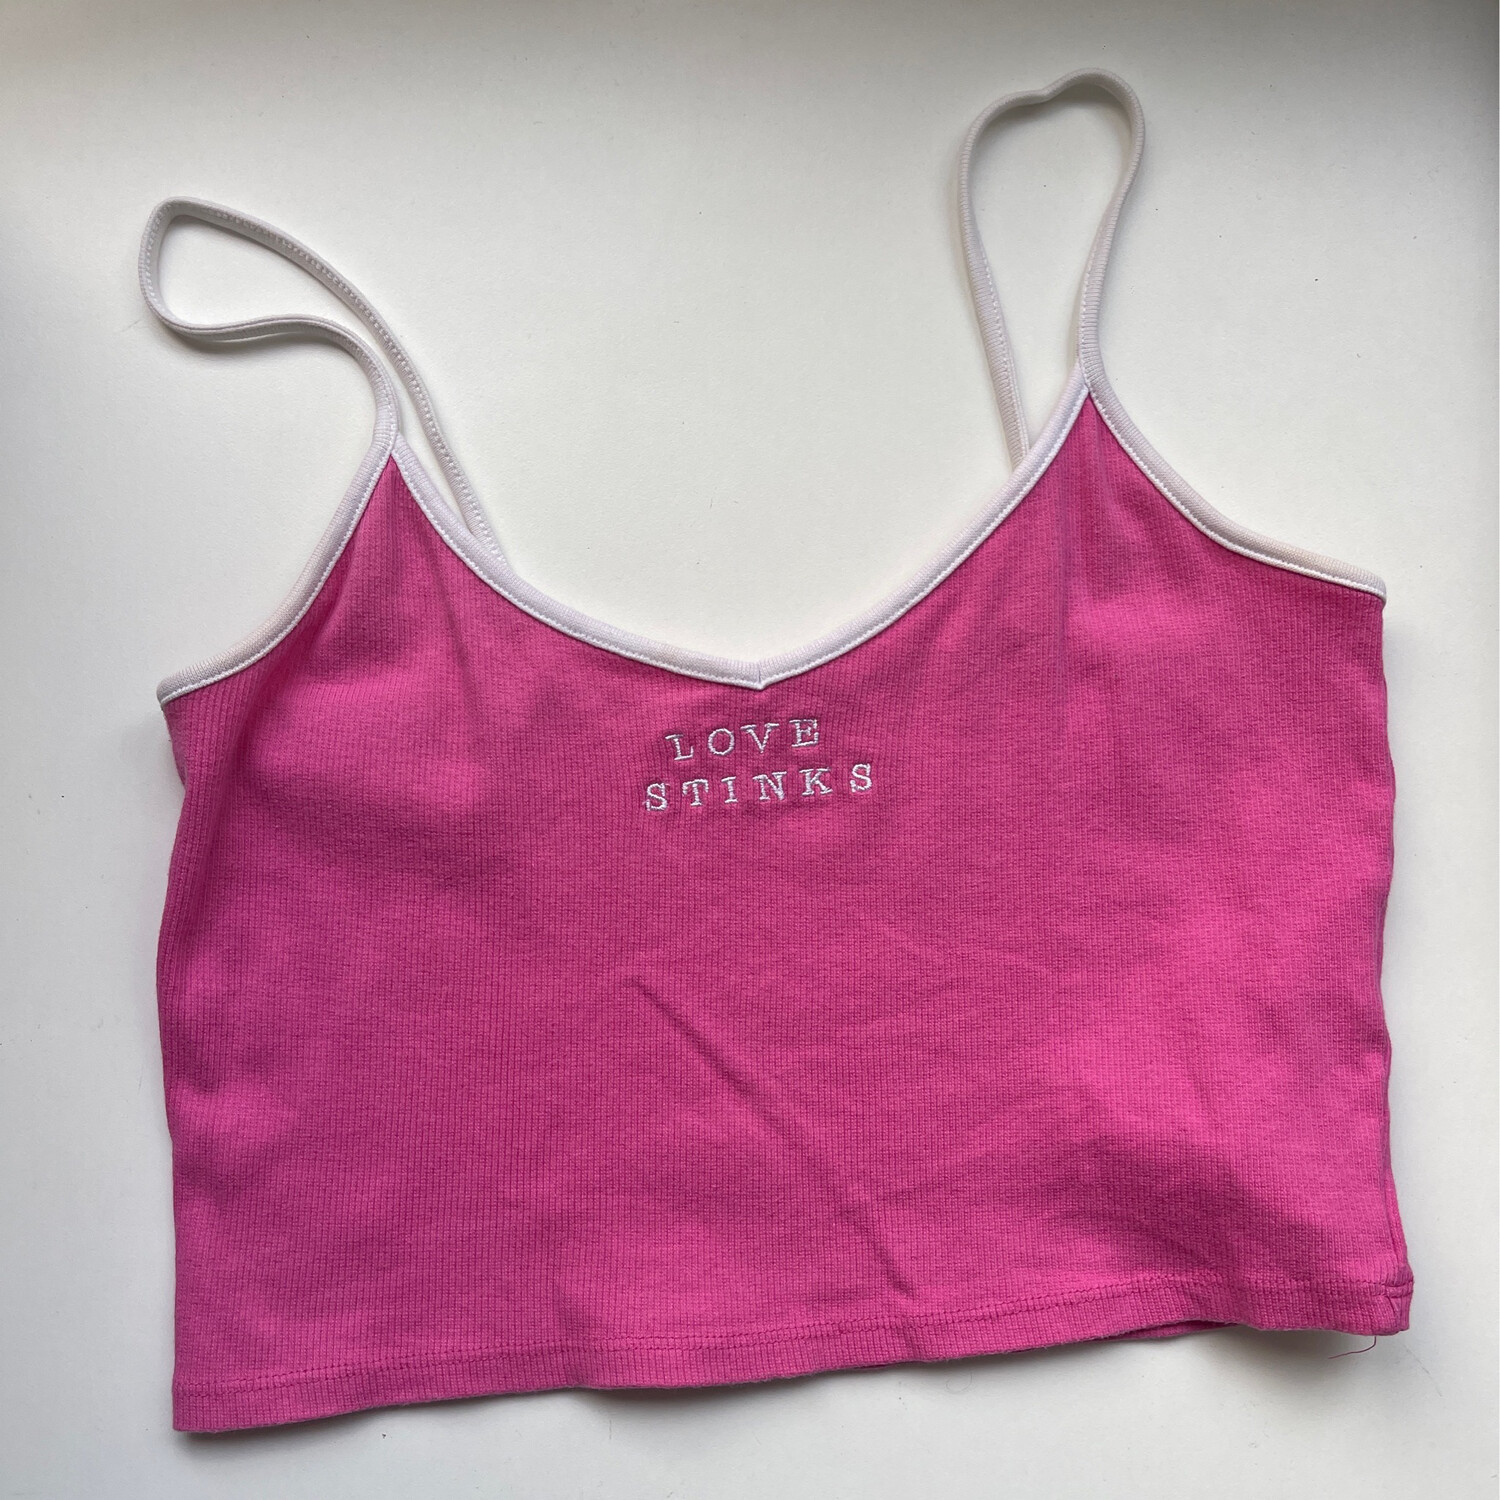 Cotton On ‘Love Stinks’ Cropped Singlet in Pink with White Detail